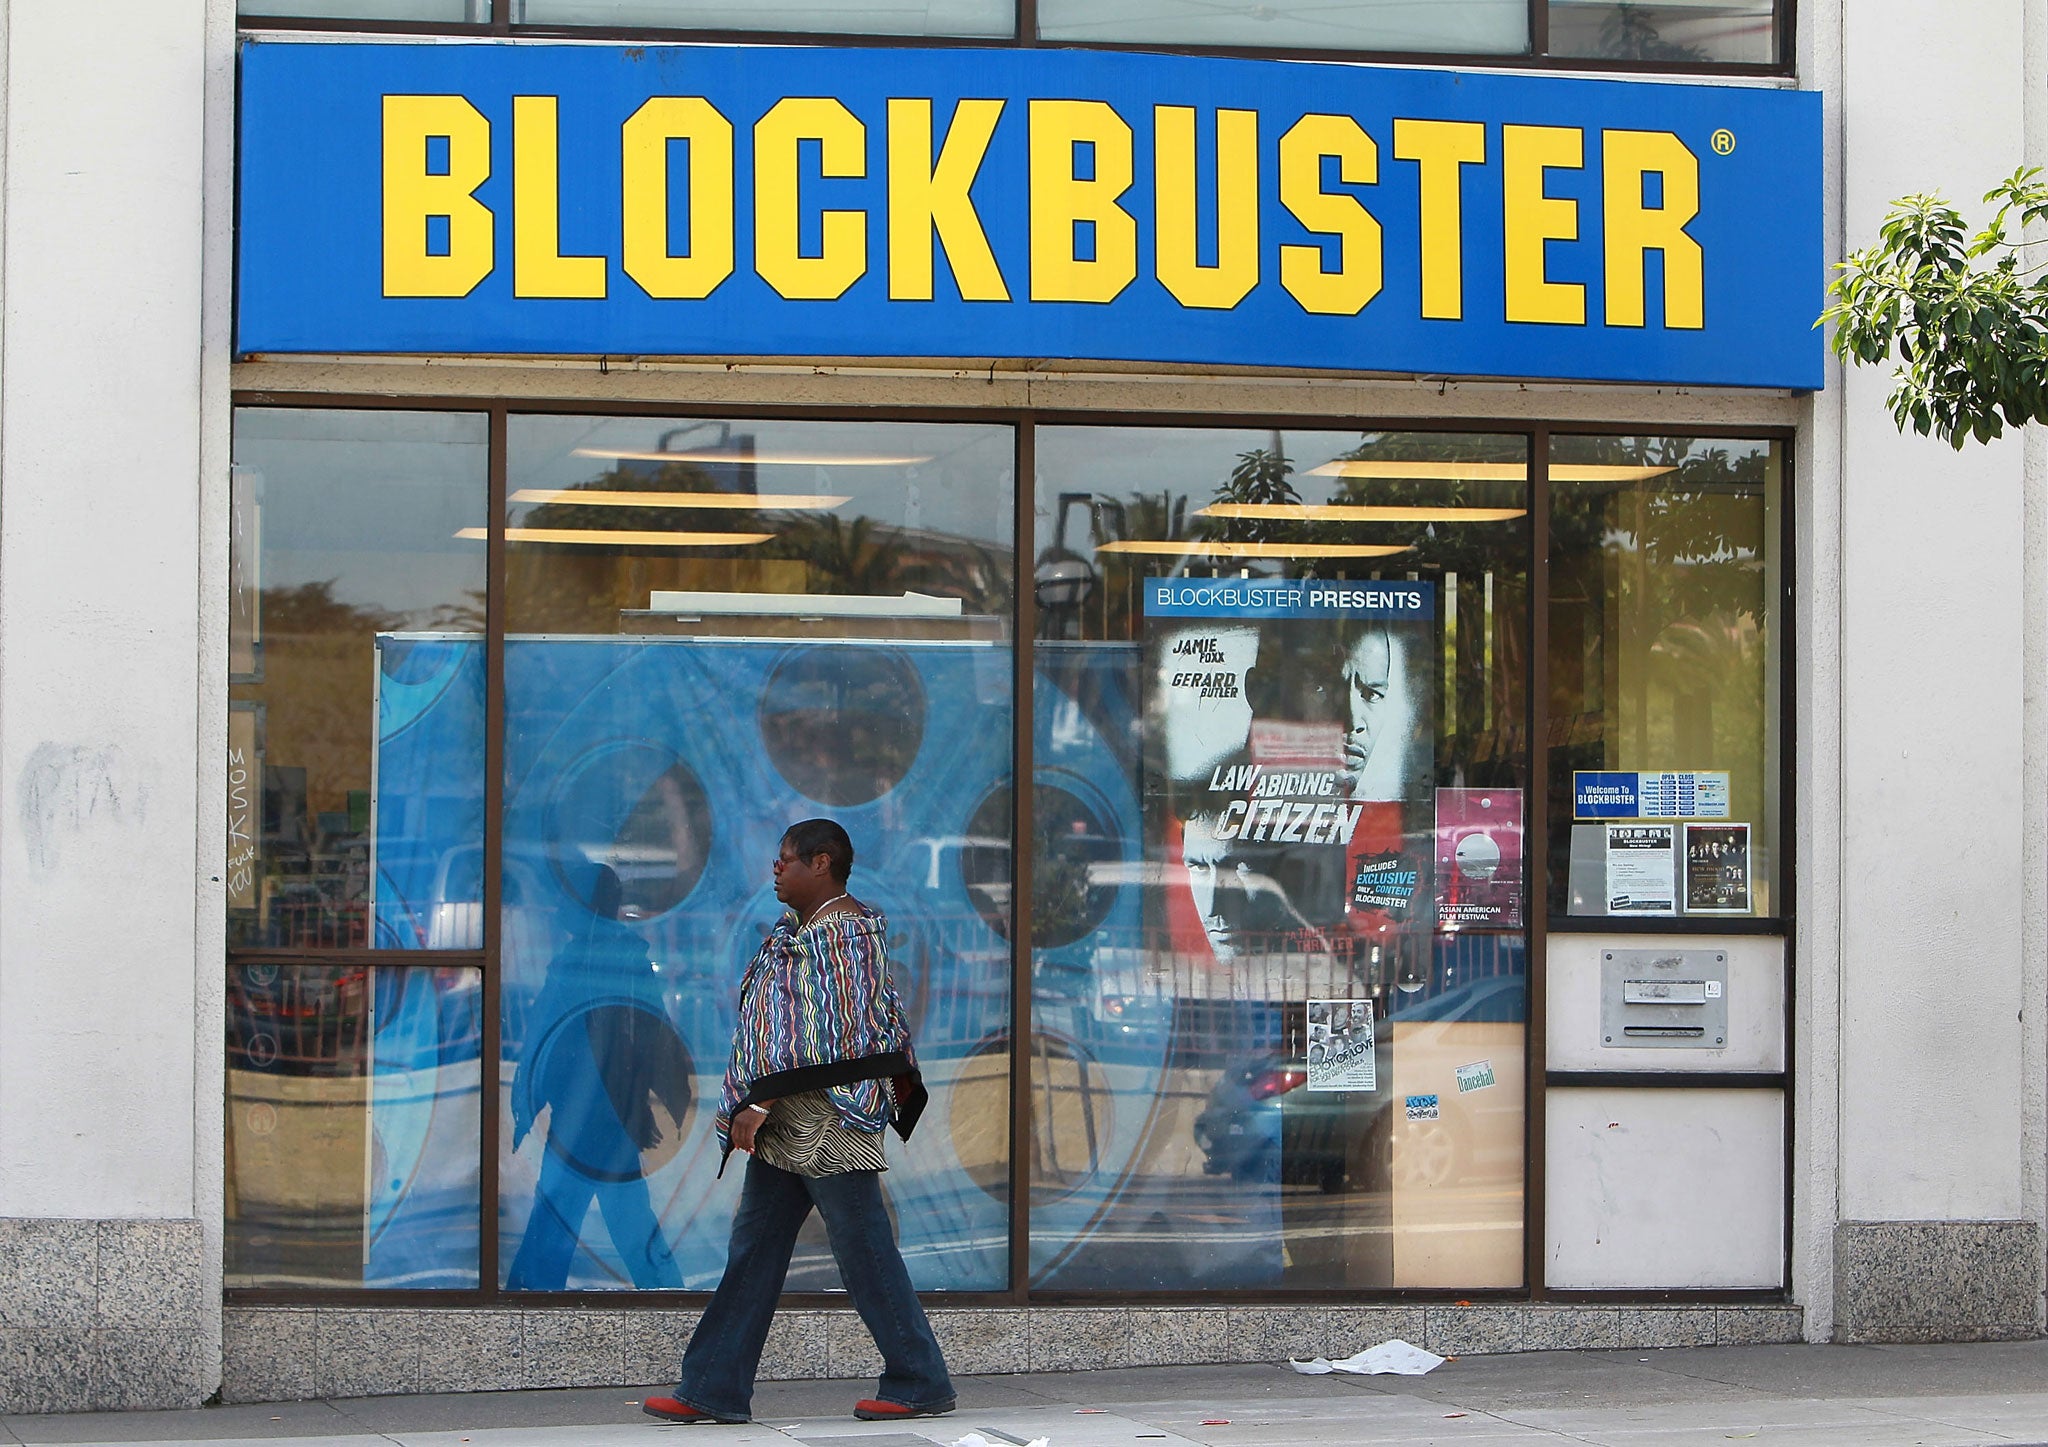 Around 2,000 jobs are at risk at Blockbuster